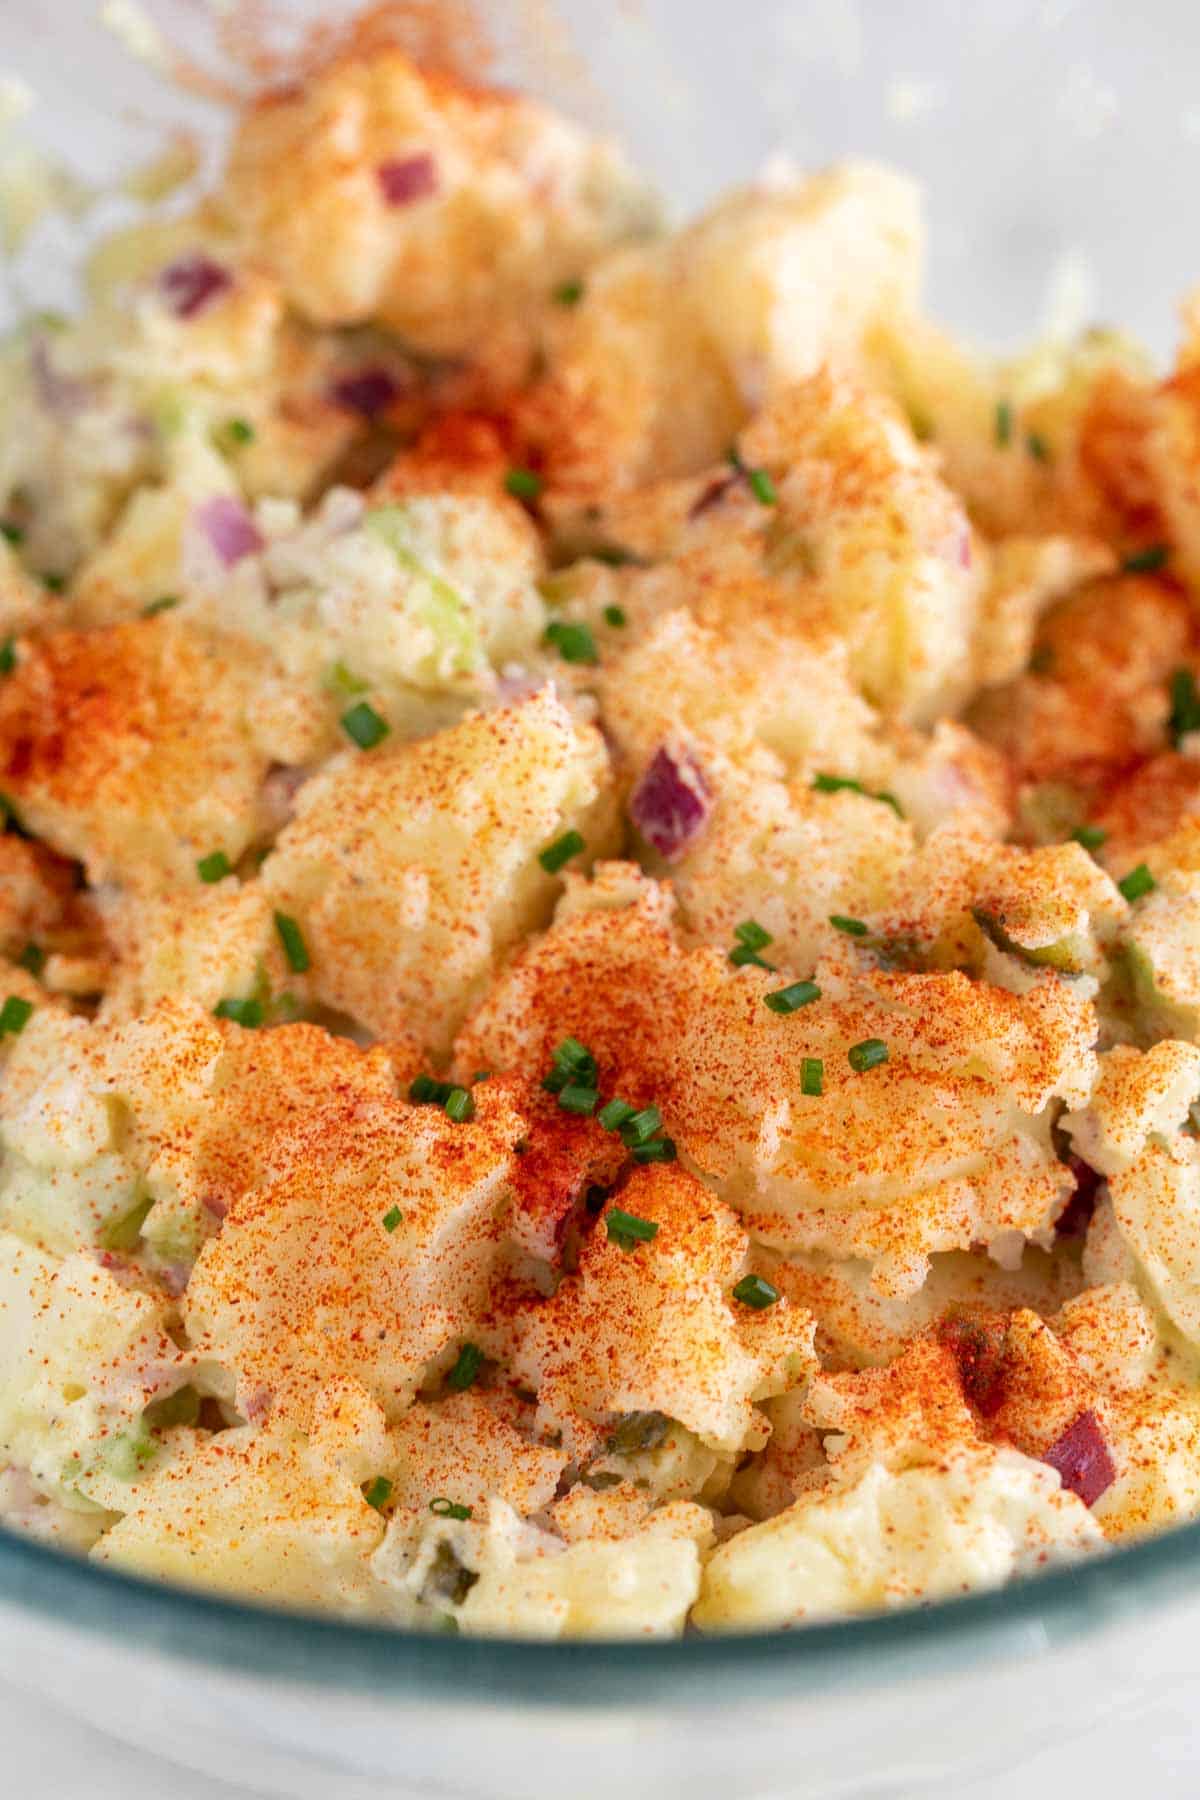 A bowl of vegan potato salad with a sprinkle of paprika and chives on top.